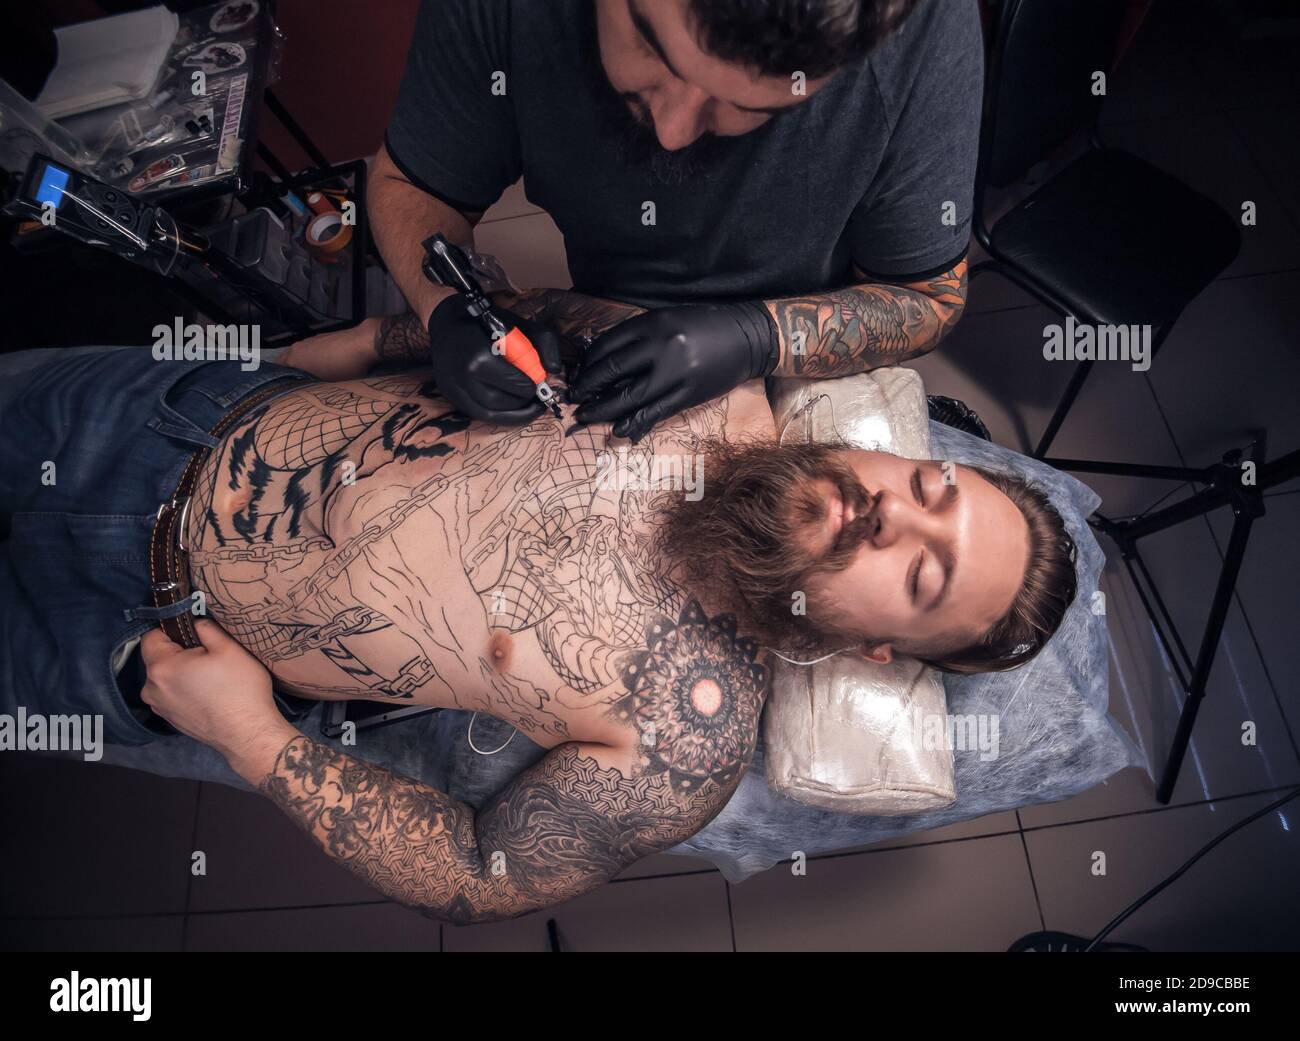 Master showing process of making a tattoo in tattoo parlour Stock Photo